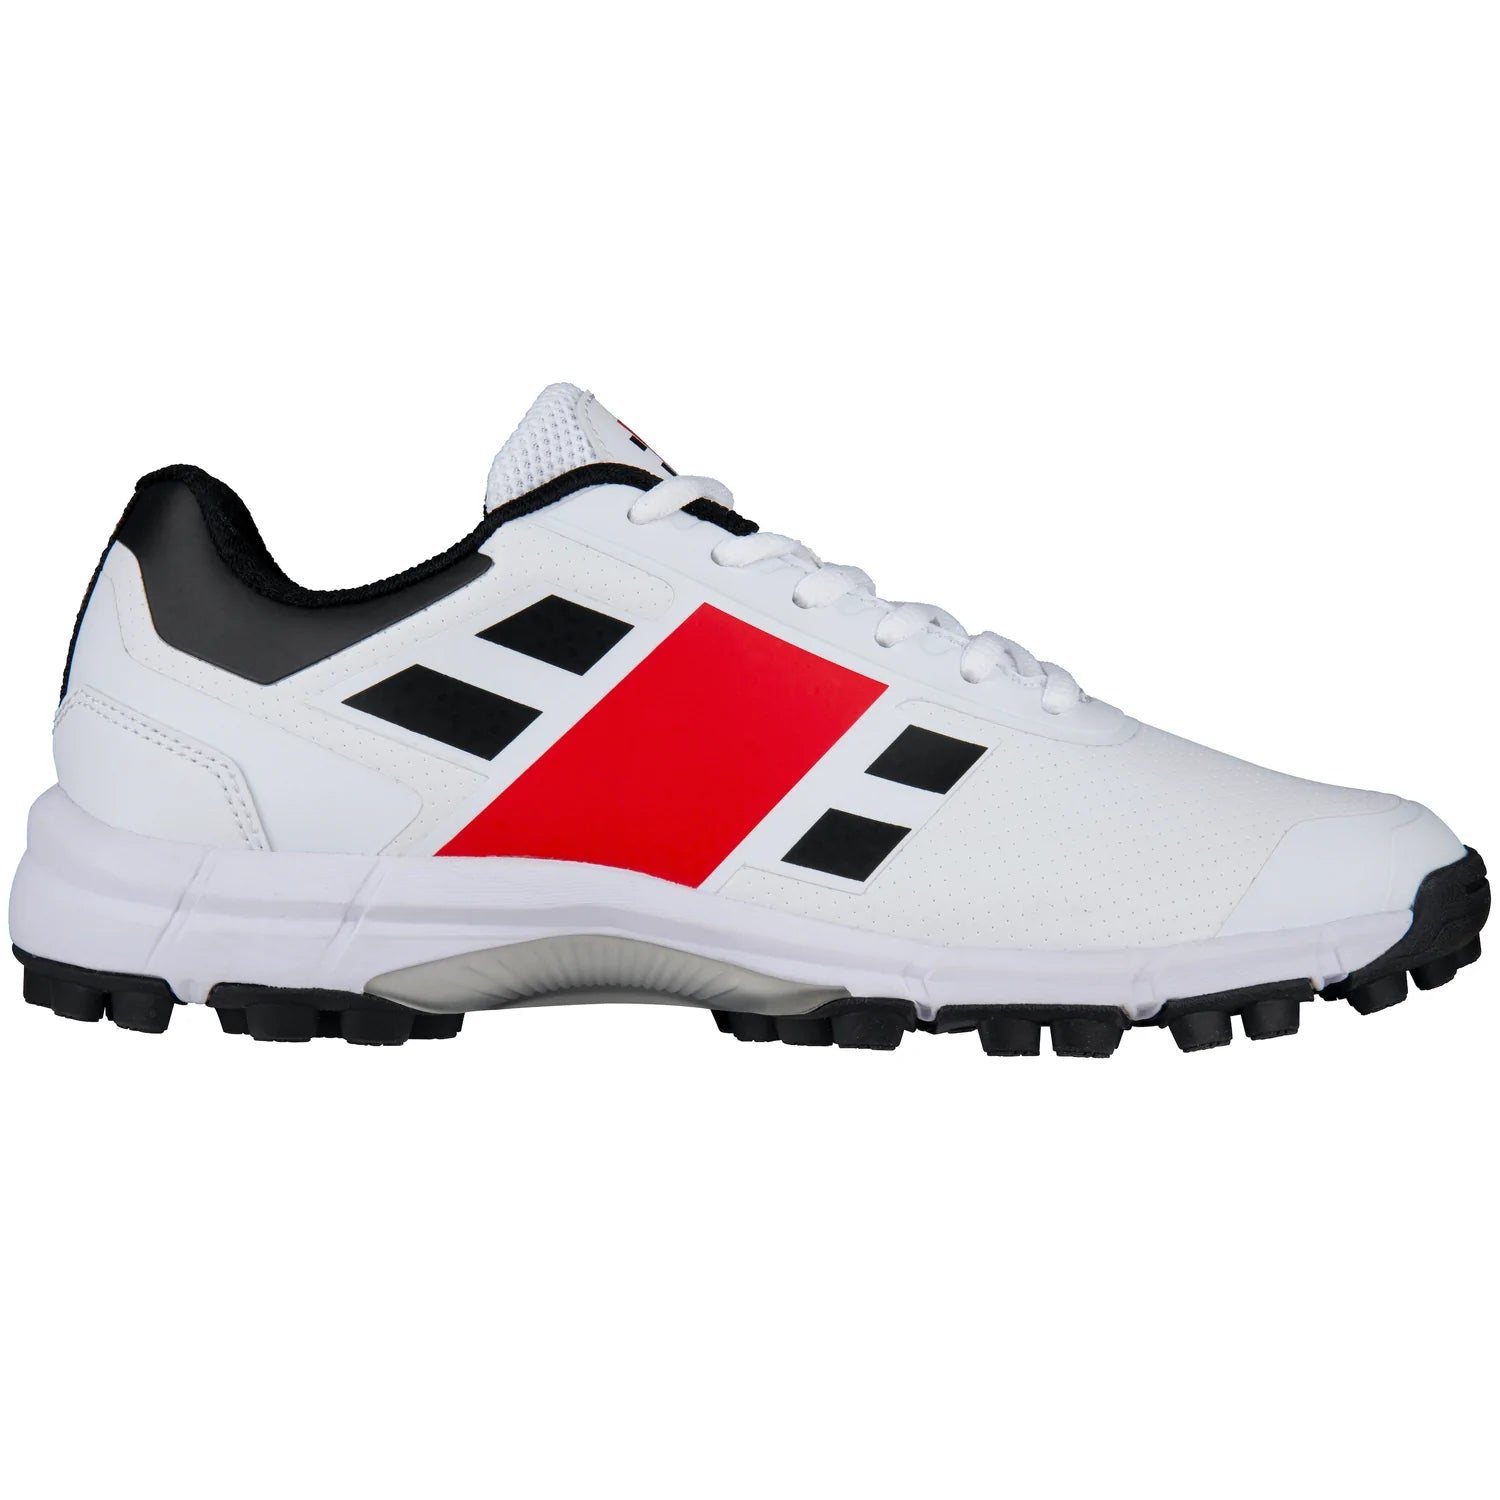 Gray-Nicolls Velocity 3.0 cricket shoes, perfect for indoor training and hard wicket play. Features ultra-light coated textile upper for flexibility, Powerband for stability, Gplus LP outsole for traction on all surfaces, and a torsional midfoot system for midfoot support and forefoot flexibility.